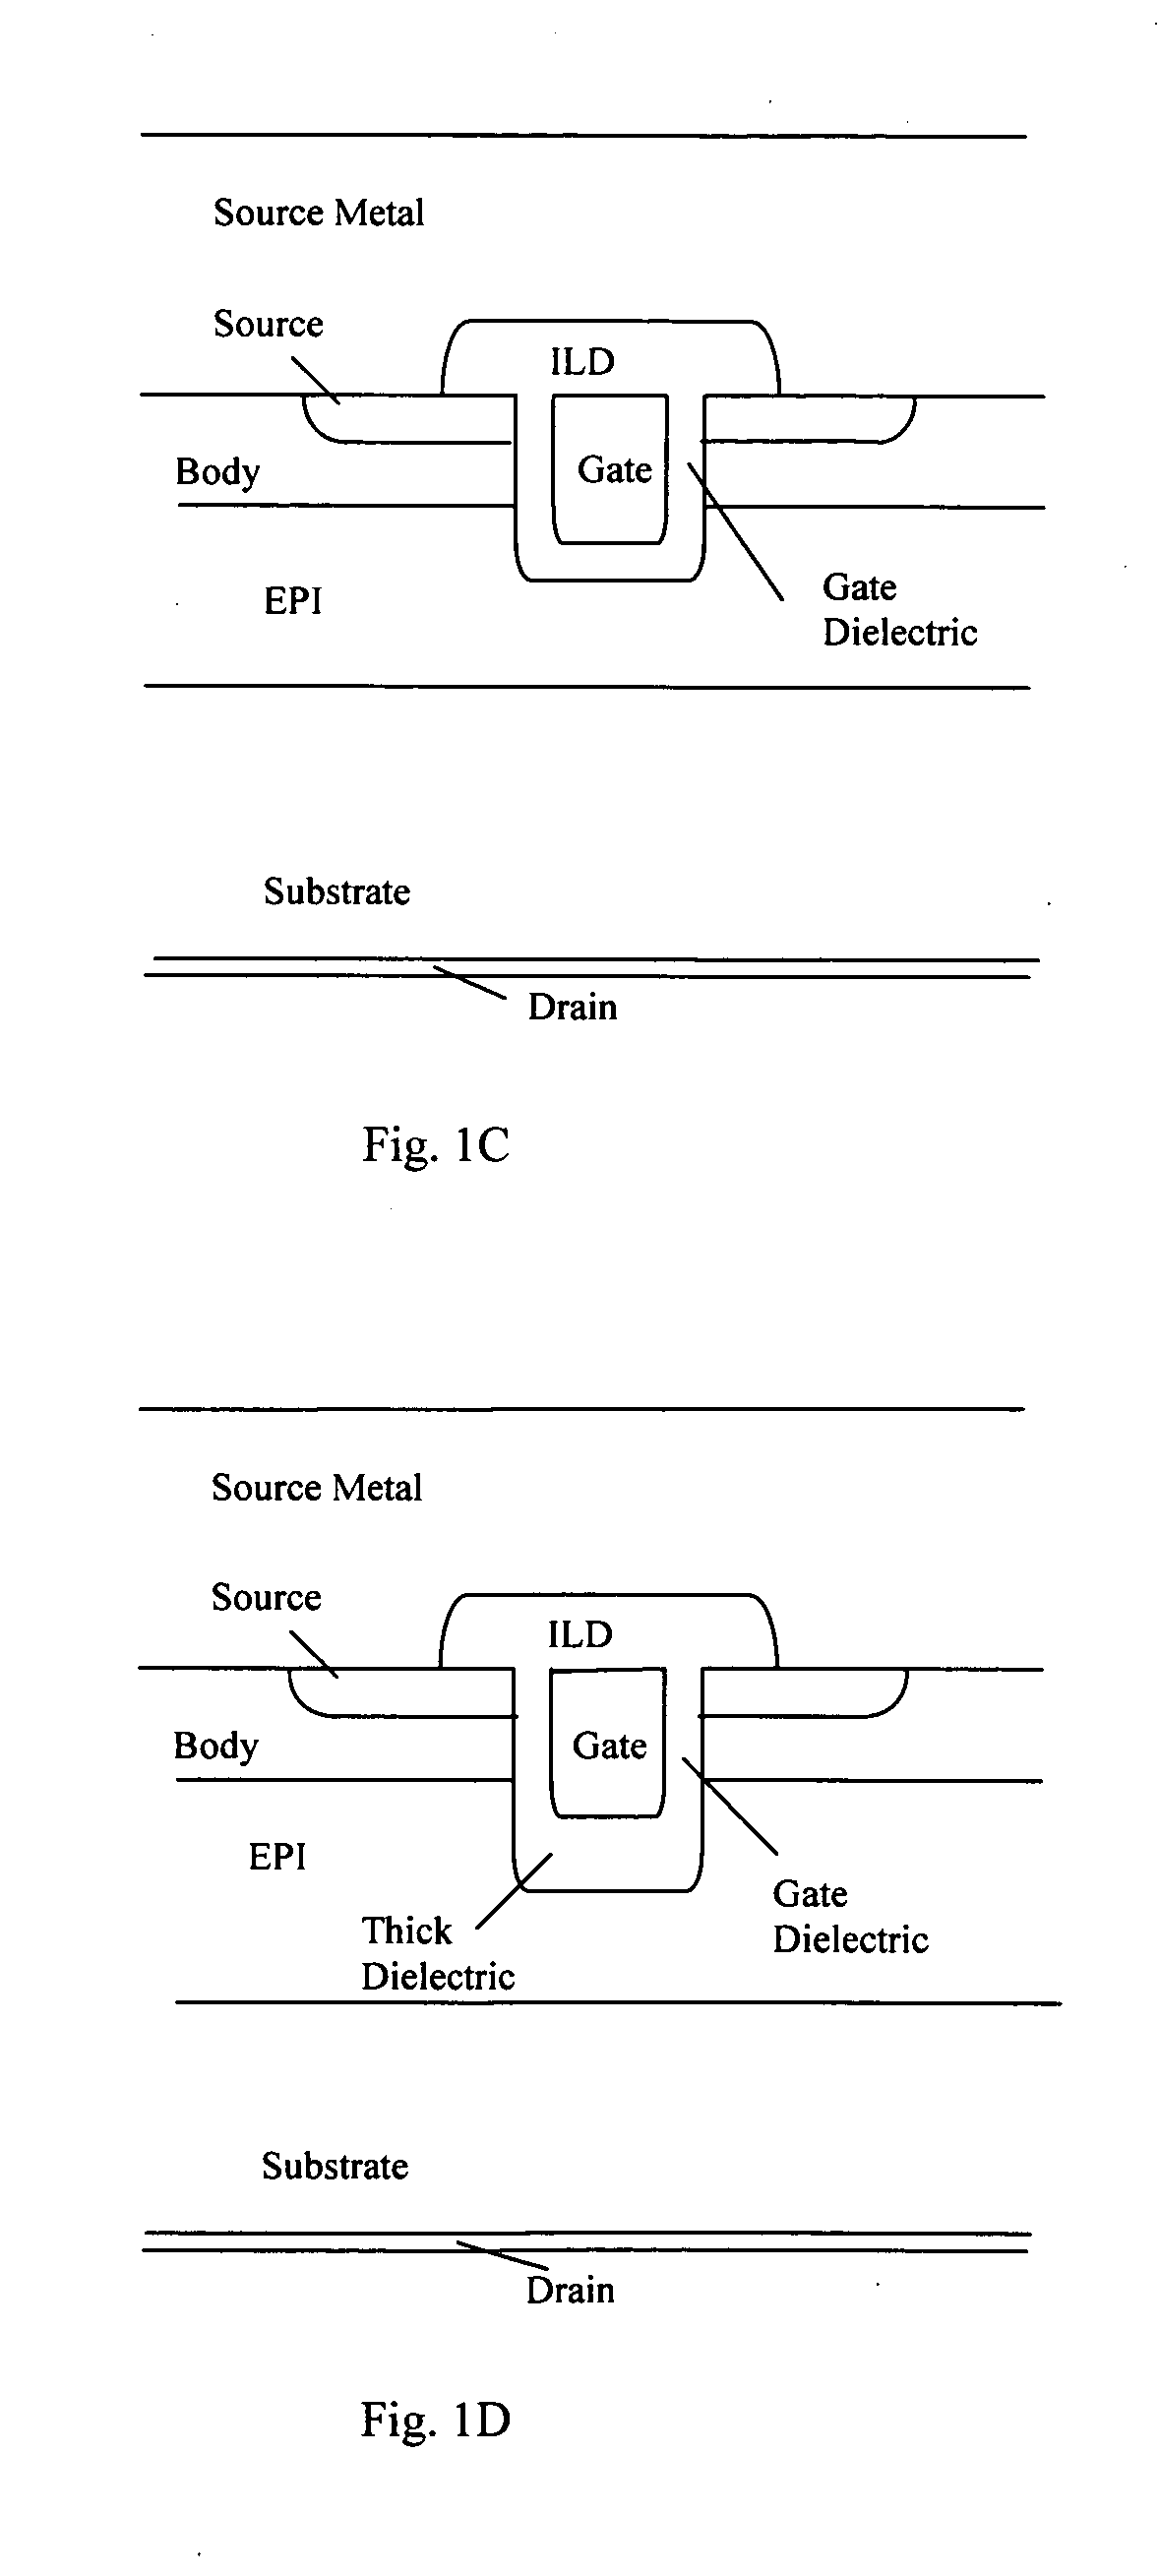 Power MOSFET device structure for high frequency applications